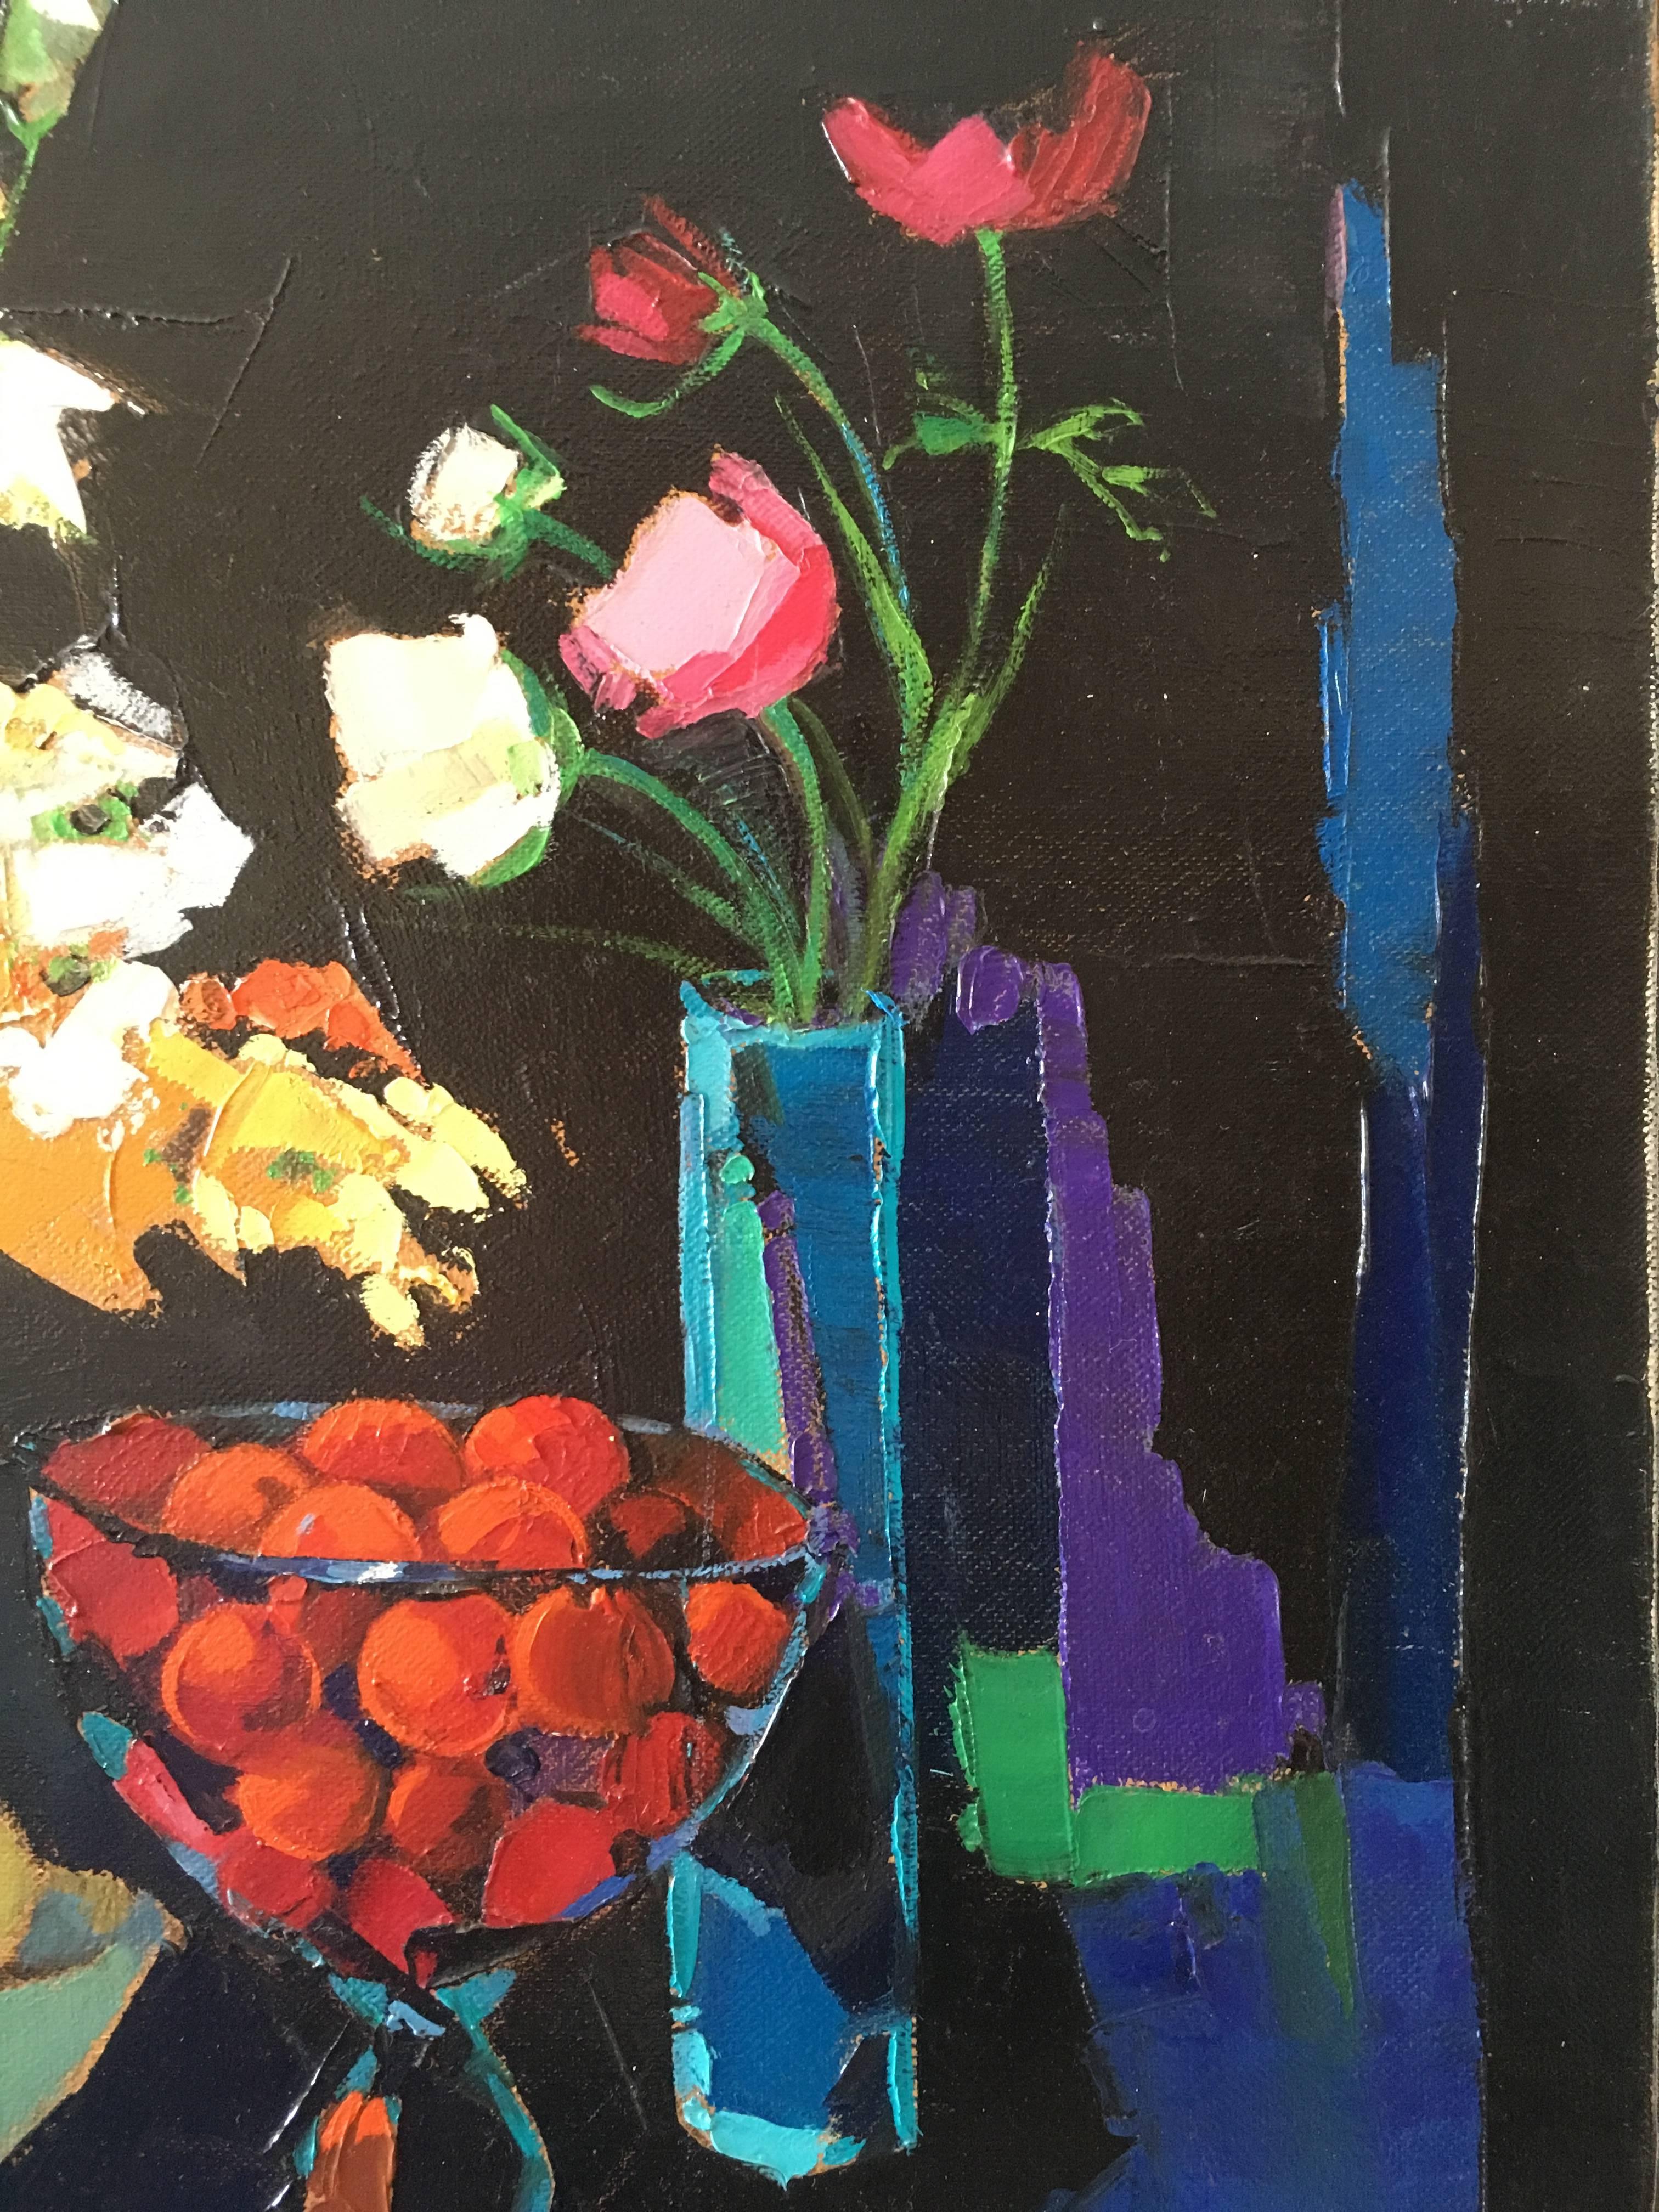 Flowers and fruits, still life  - Expressionist Painting by Jori Duran